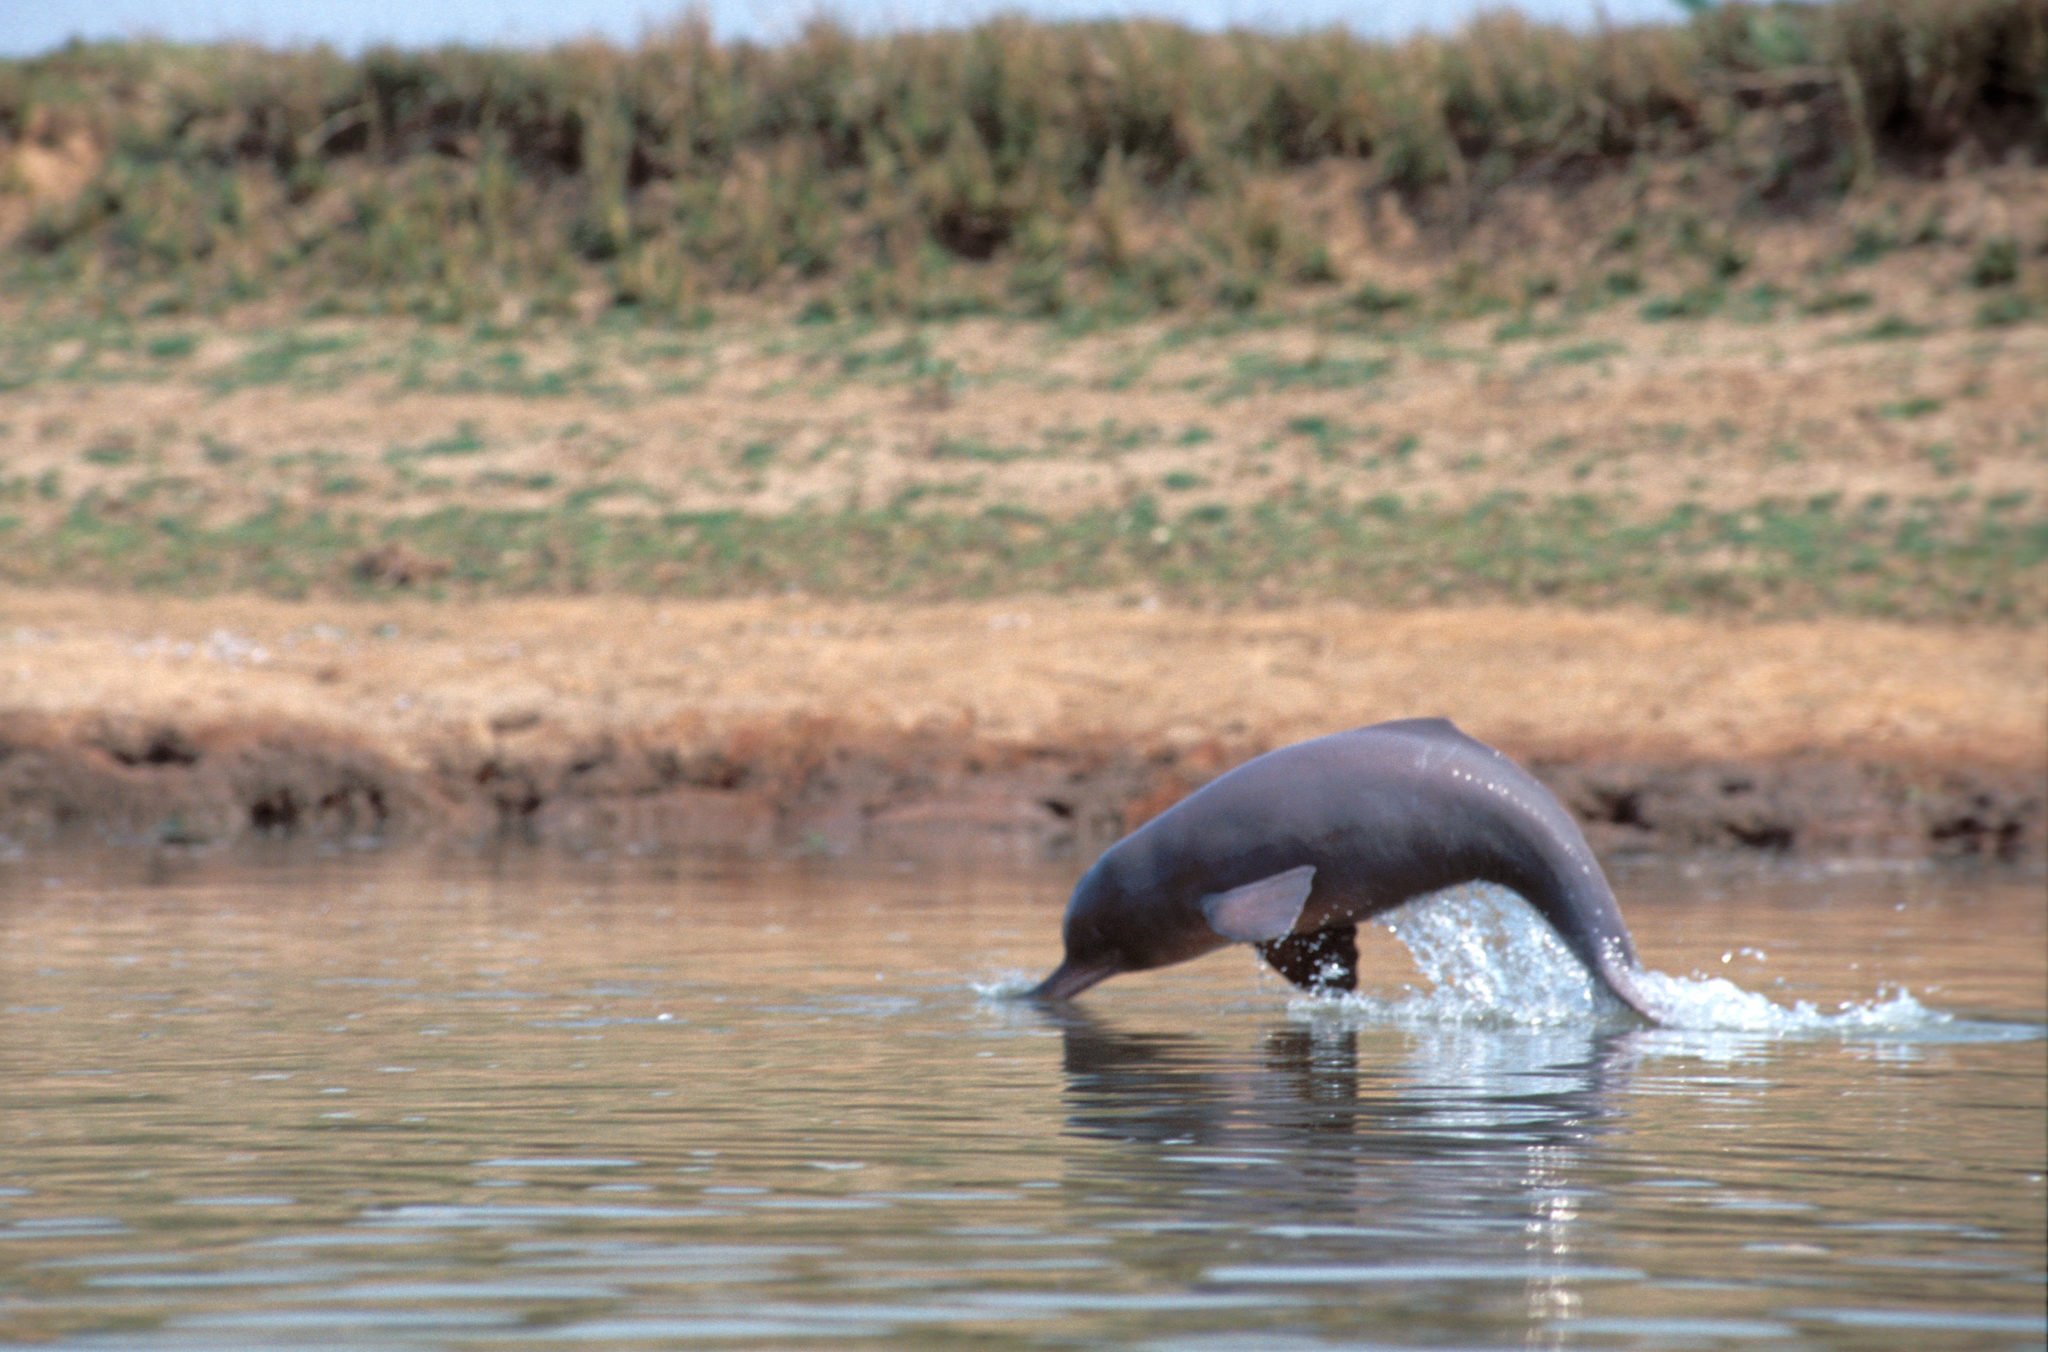 An encounter with the elusive Gangetic dolphin | The Third Pole